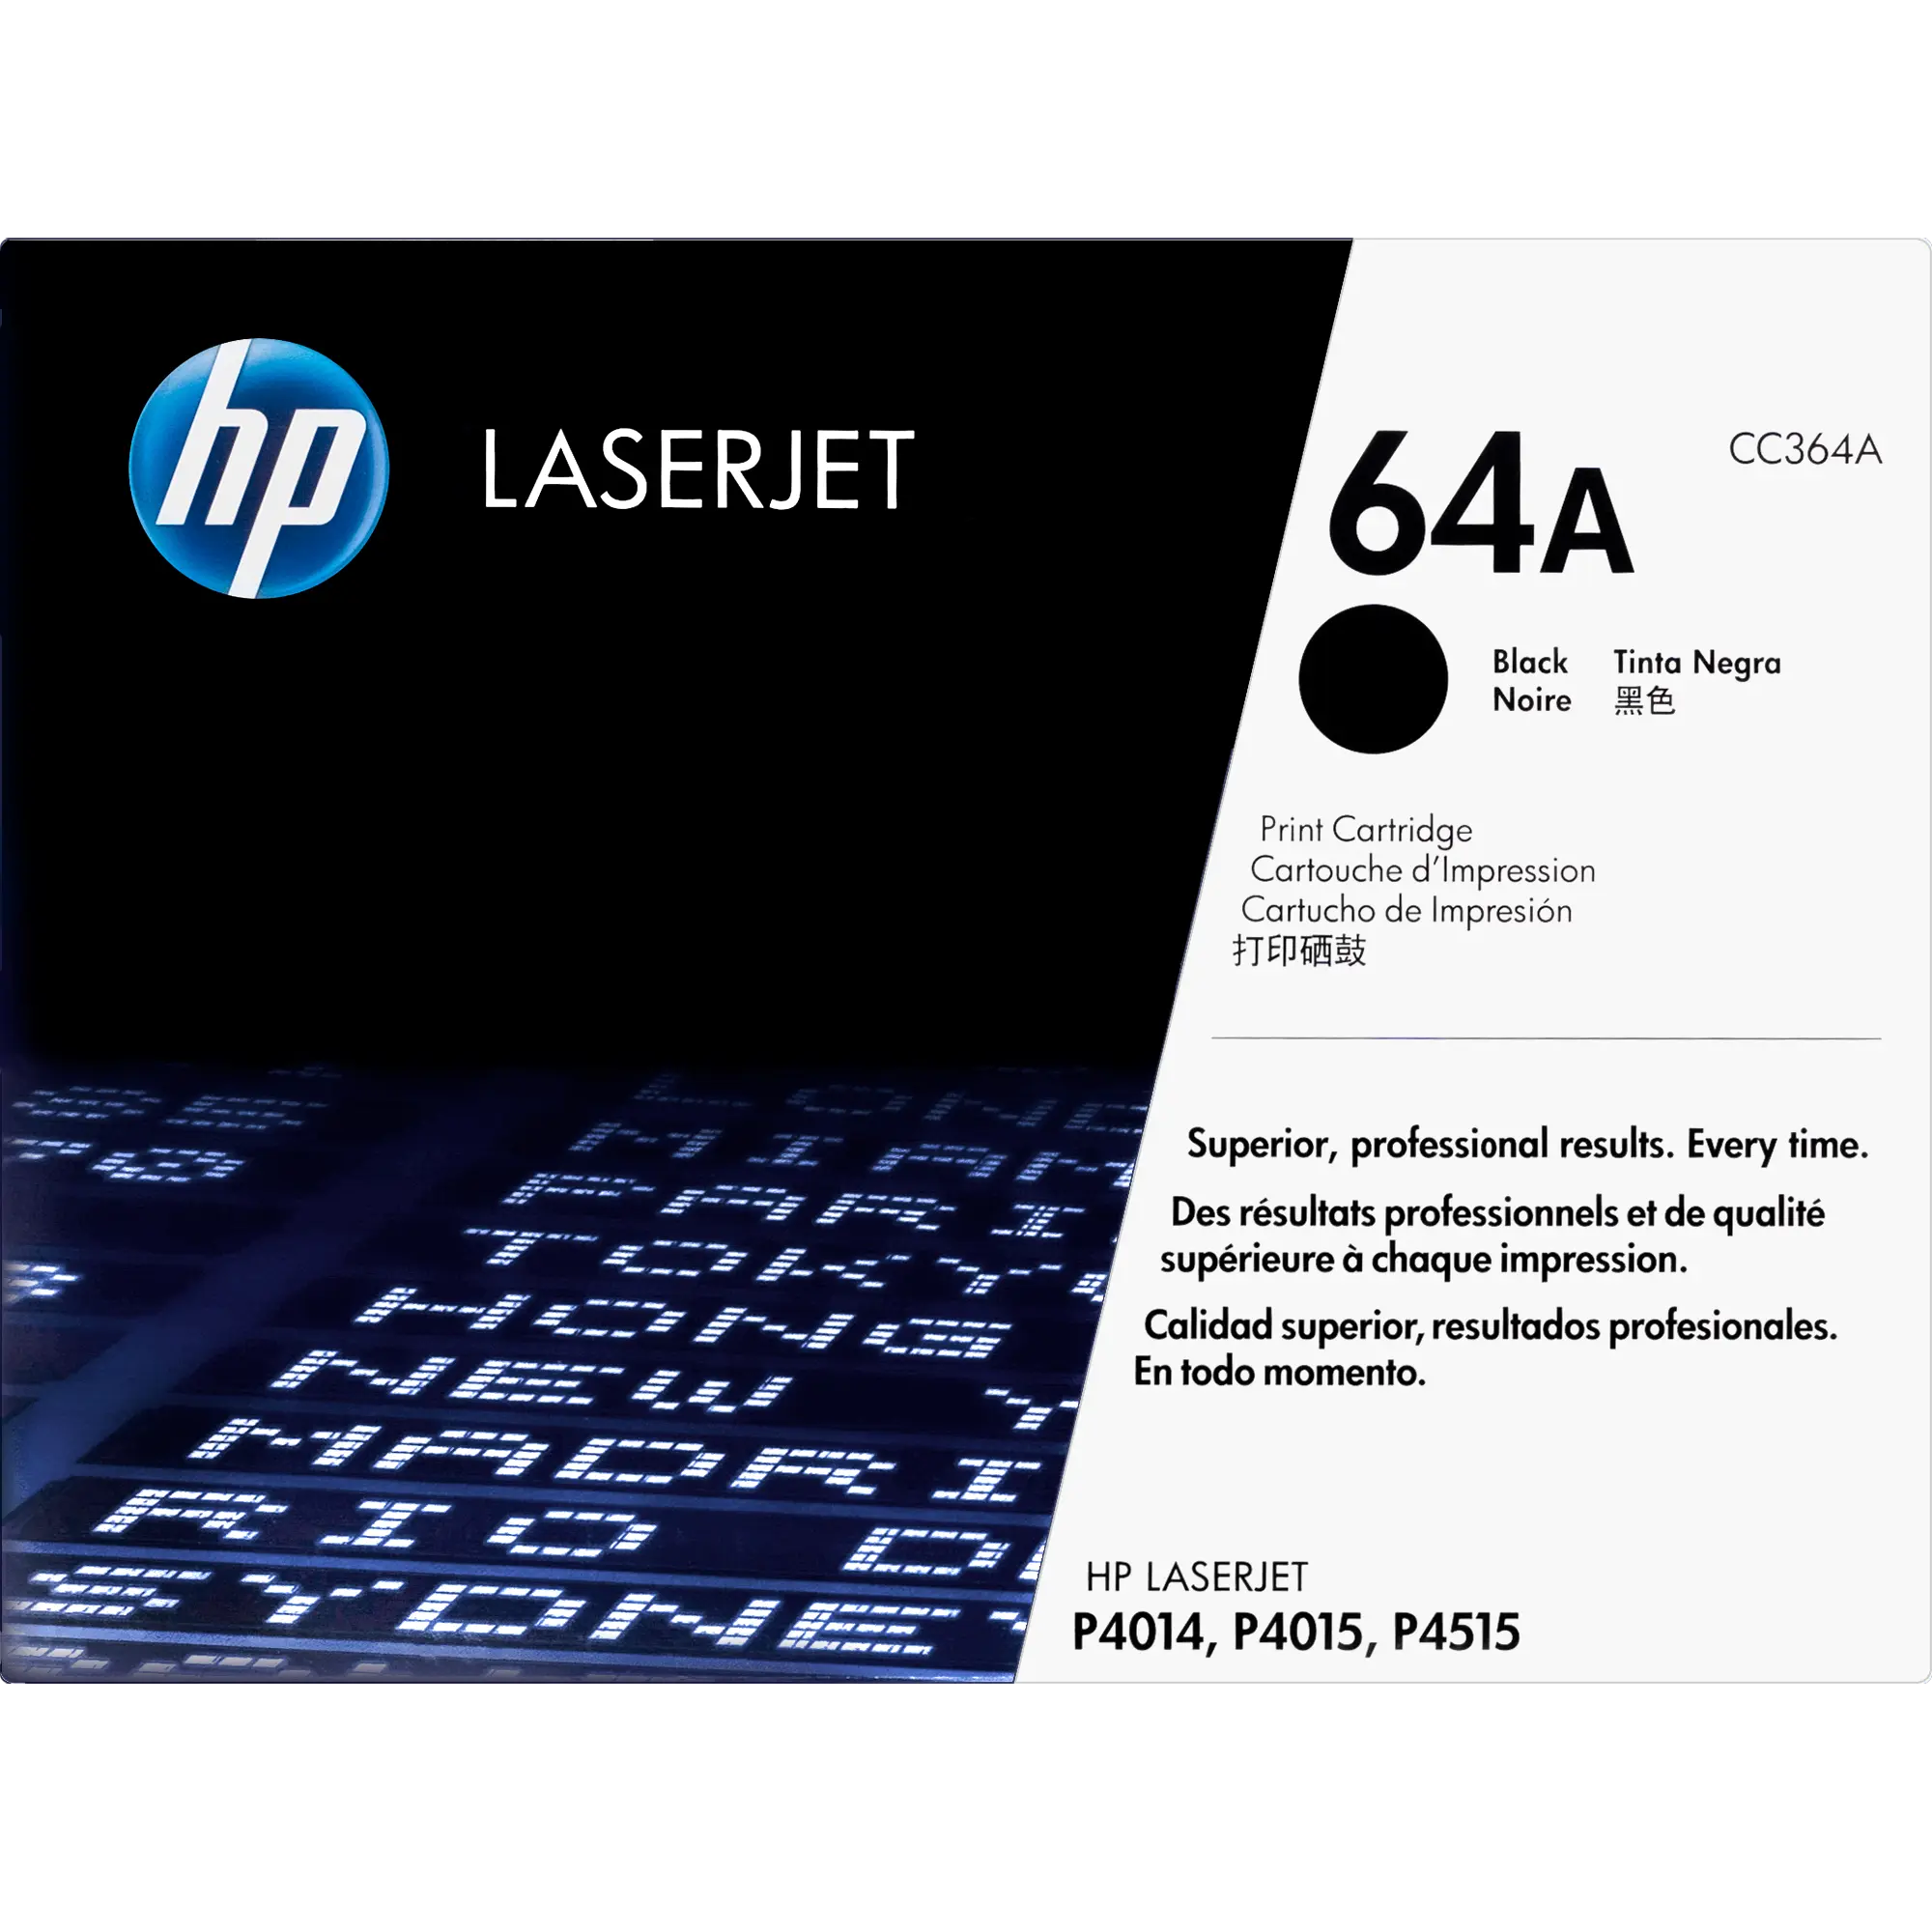 Hp 64a toner: ultimate guide for high-quality prints